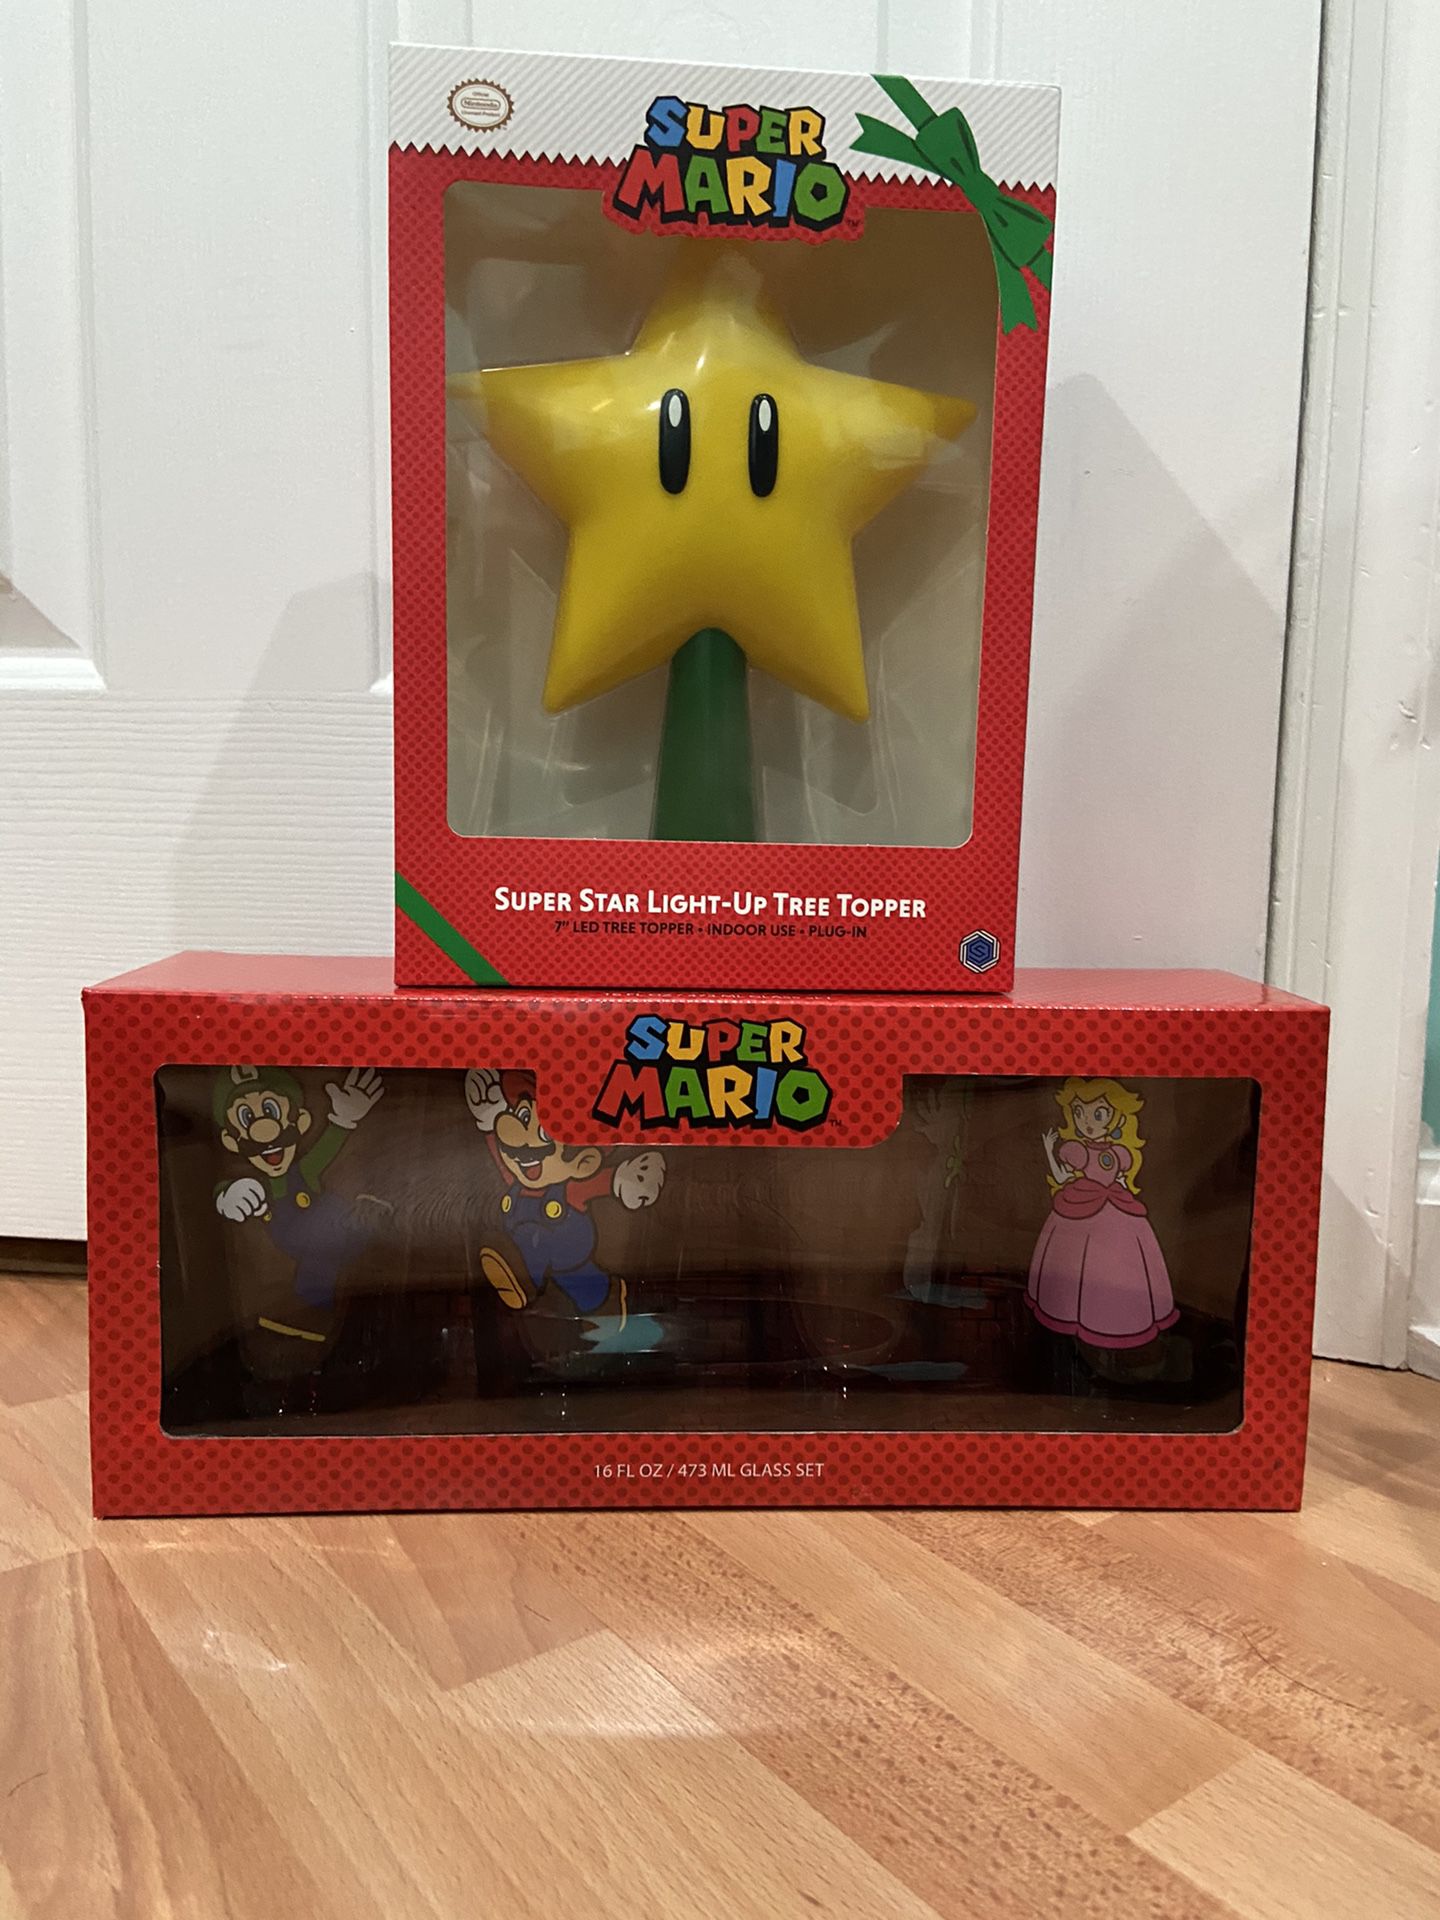 Super Mario Collectable Christmas Gift Items